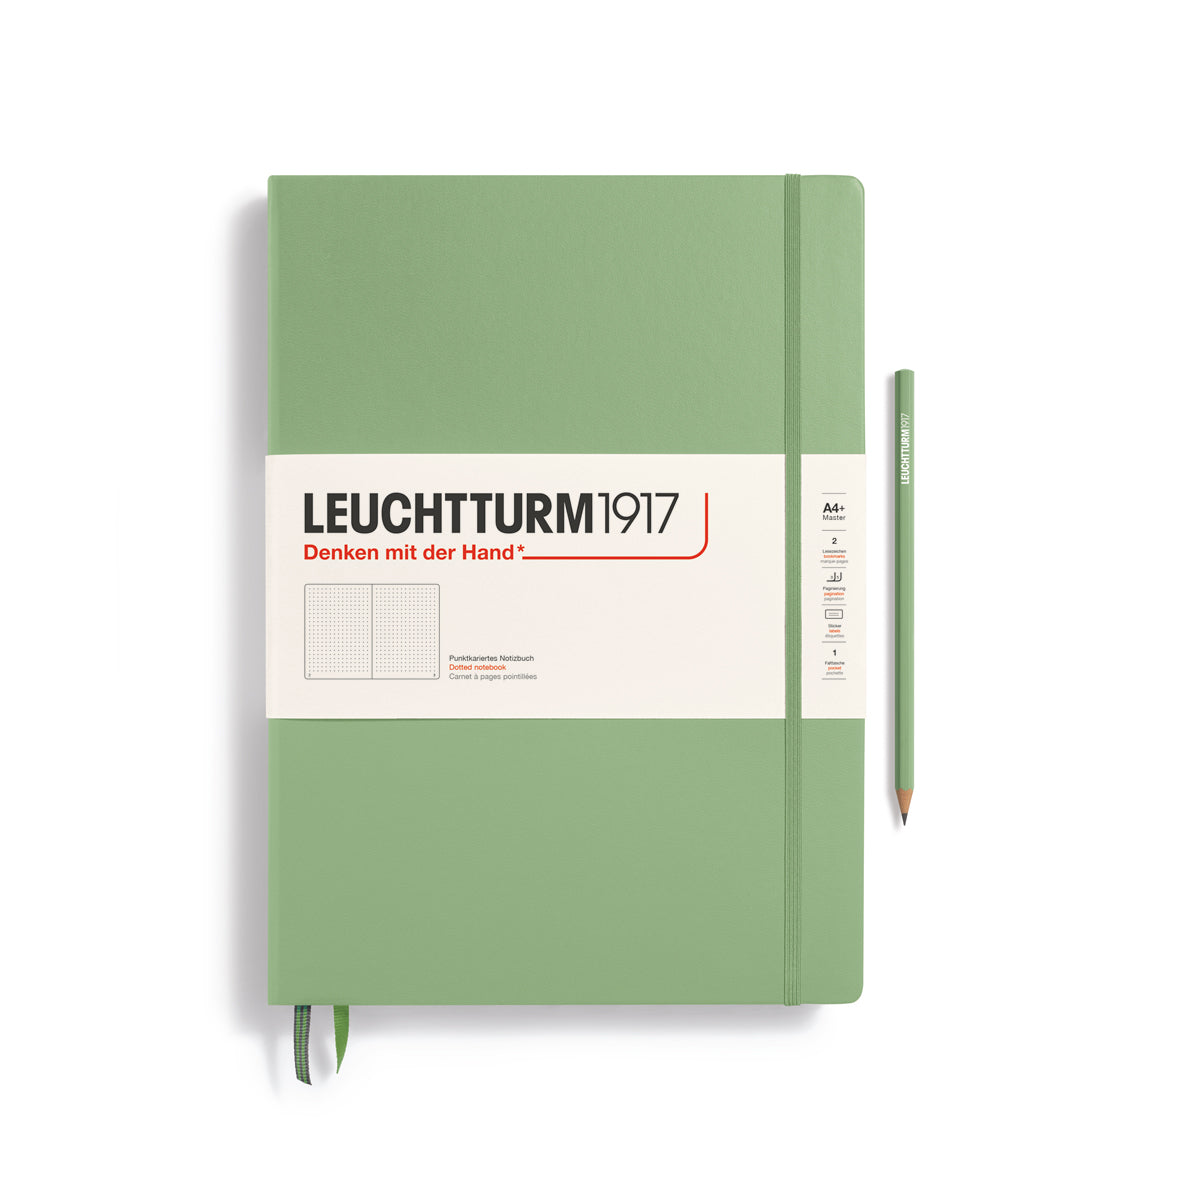 A large sage green notebook with a white paper band around it with the logo of the brand Leuchtturm1917. Below this is an image of the page ruling inside - in this case, dotted. It has two page marker ribbons showing at the bottom near the binding and a matching colour elastic notebook closure holding it neatly together. A sage green Leuchtturm pencil is shown at the side of the book.